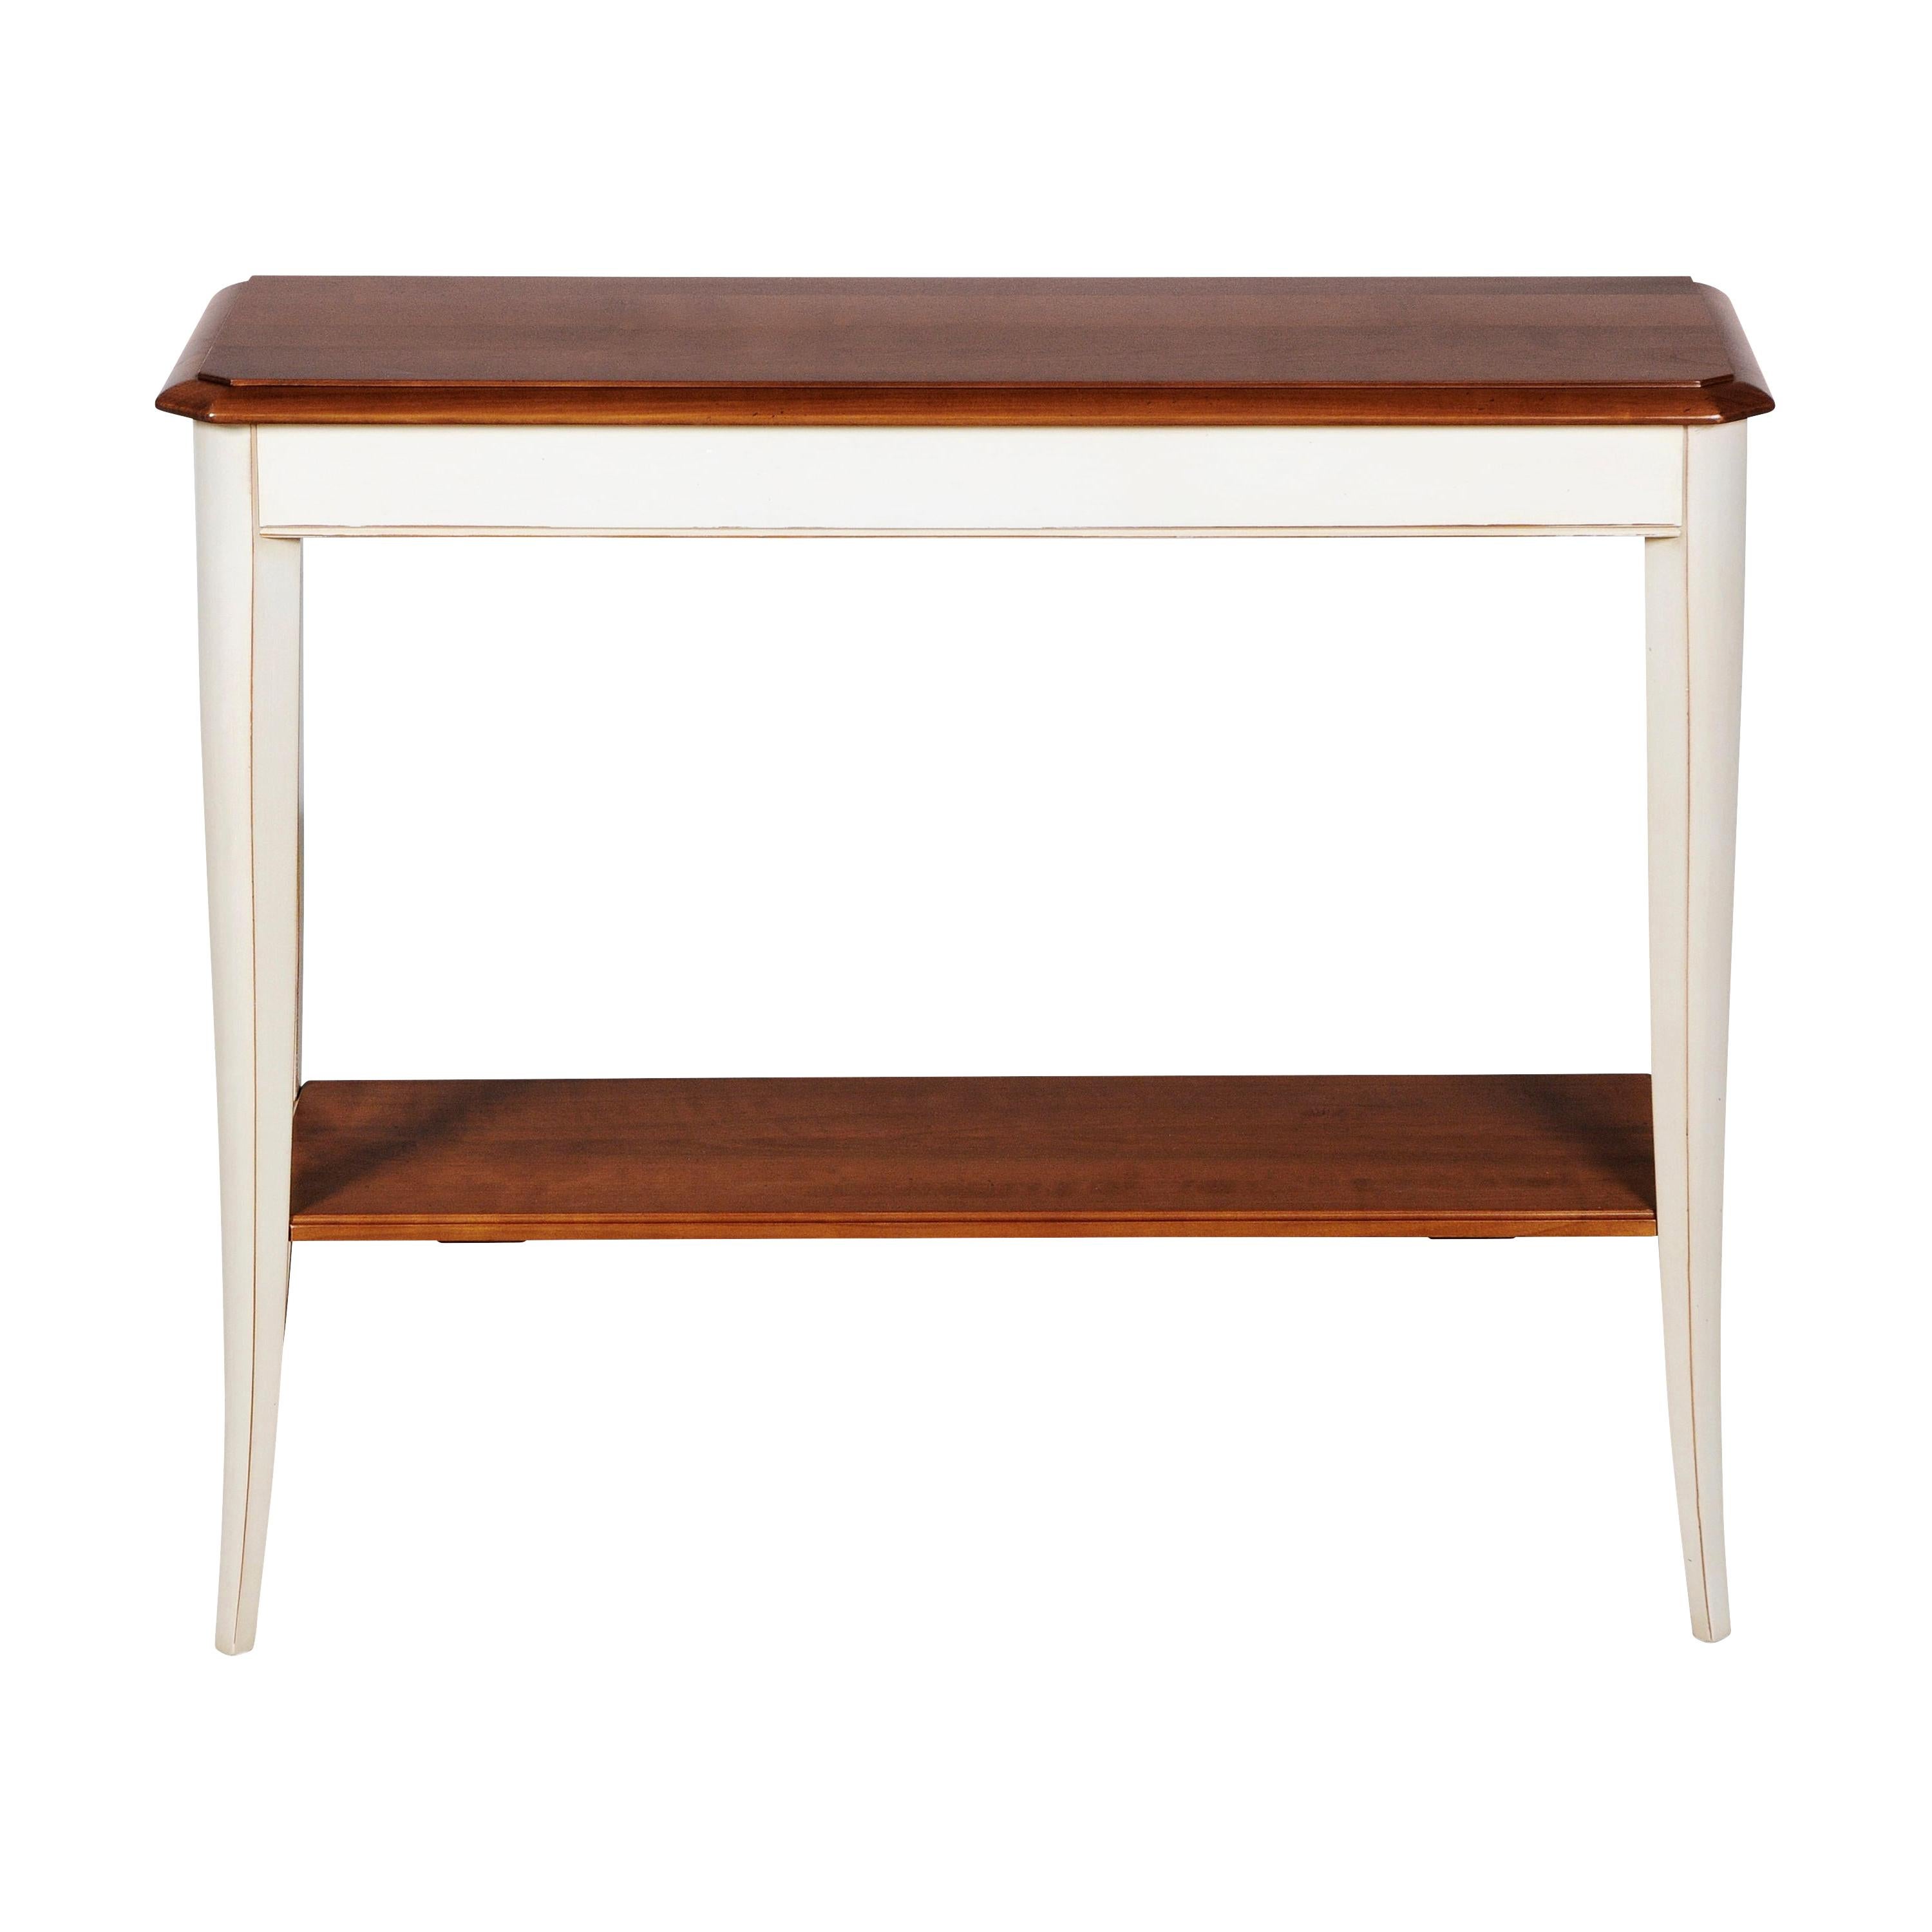 French Countryside Console Table in Cherry, 100% Made in France